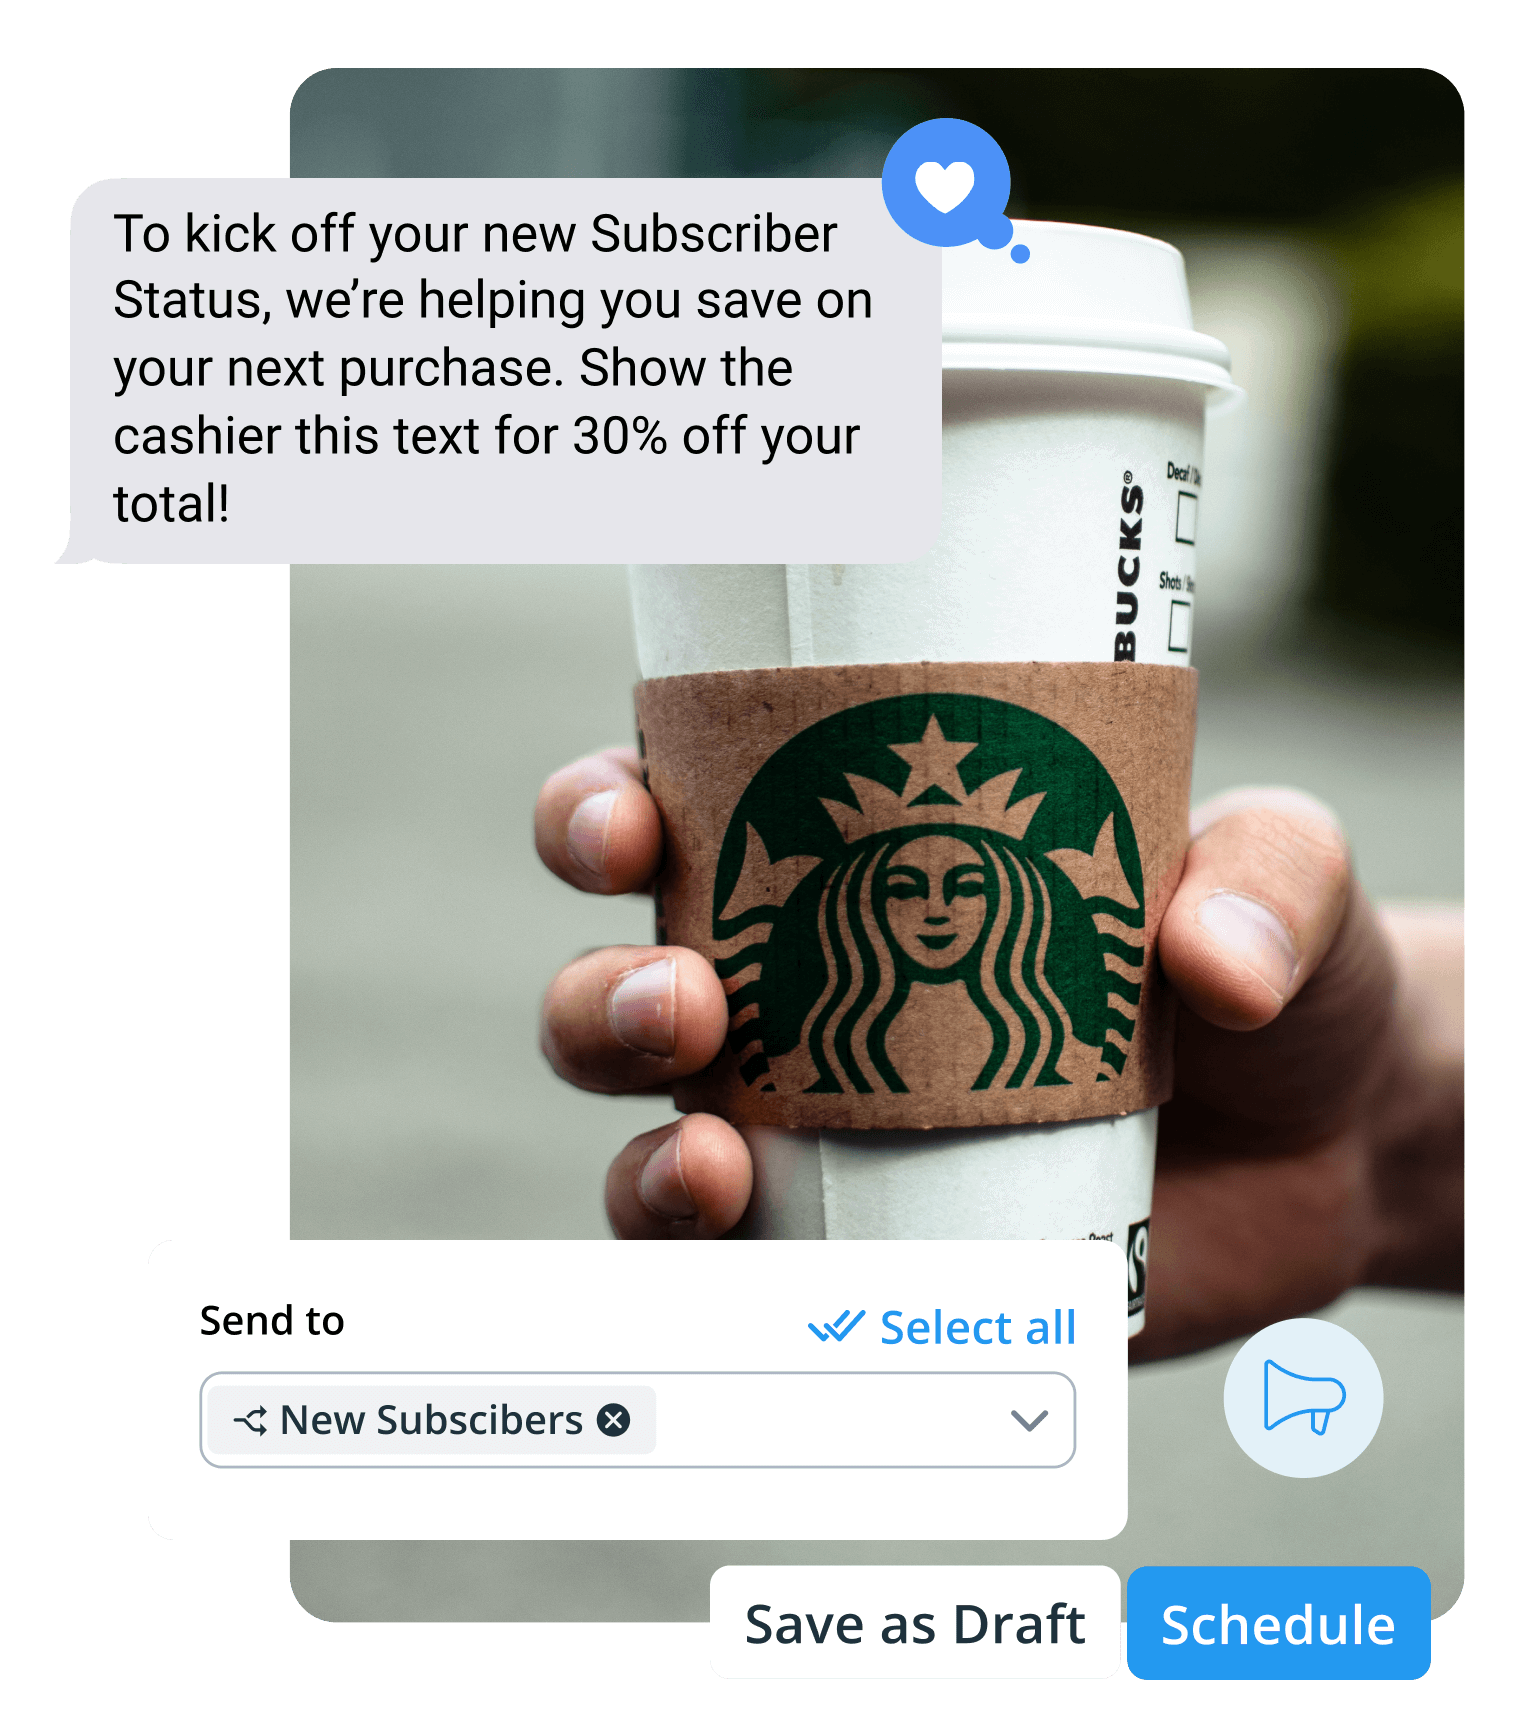 Text message conversation example for franchise business